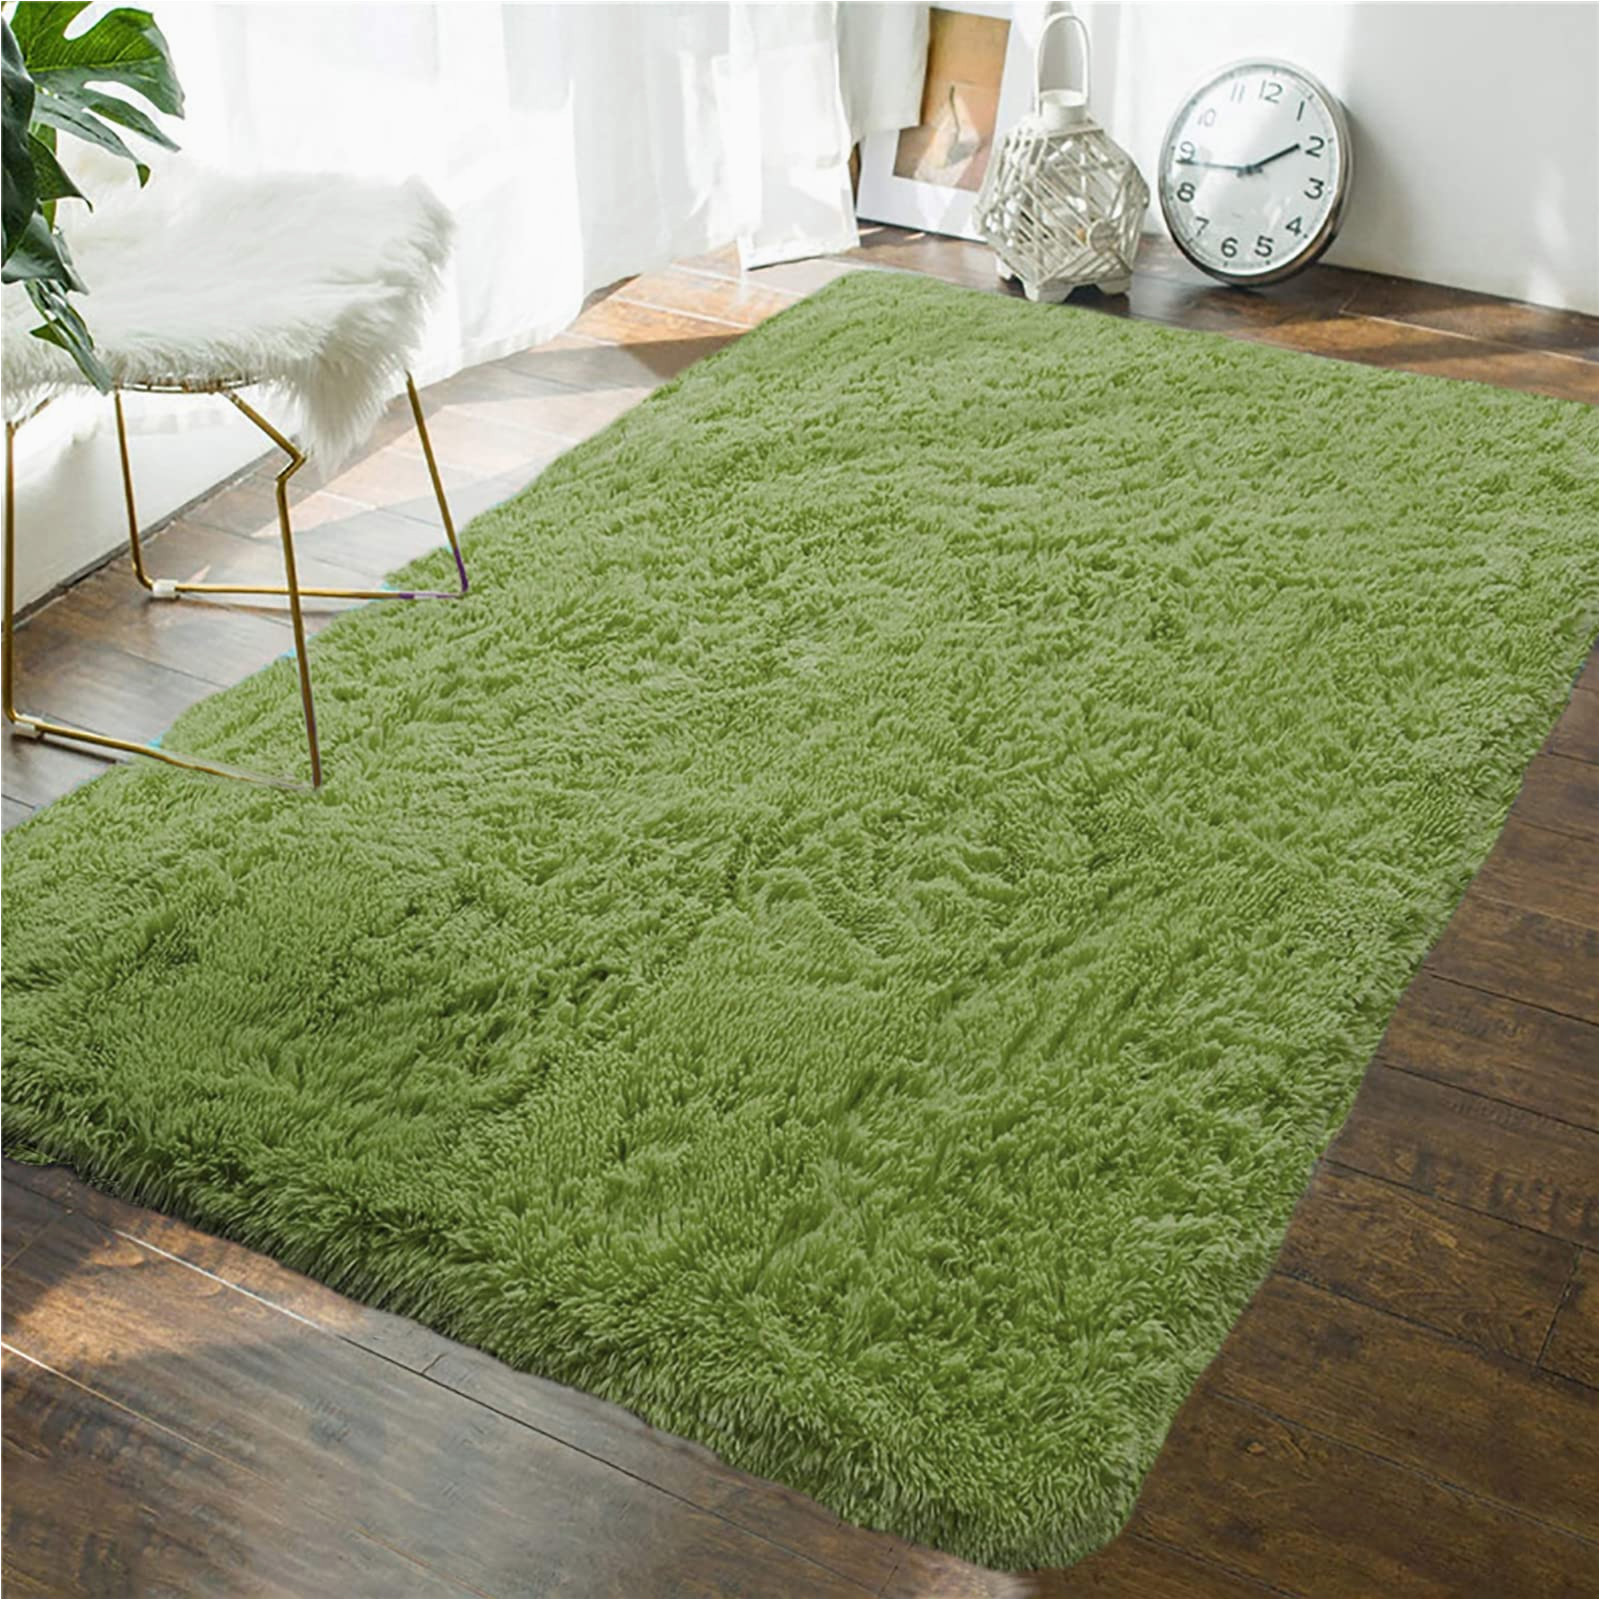 4 X 6 Green area Rugs Amazon.com: 4×6 Green area Rugs for Living Room Super soft Floor …